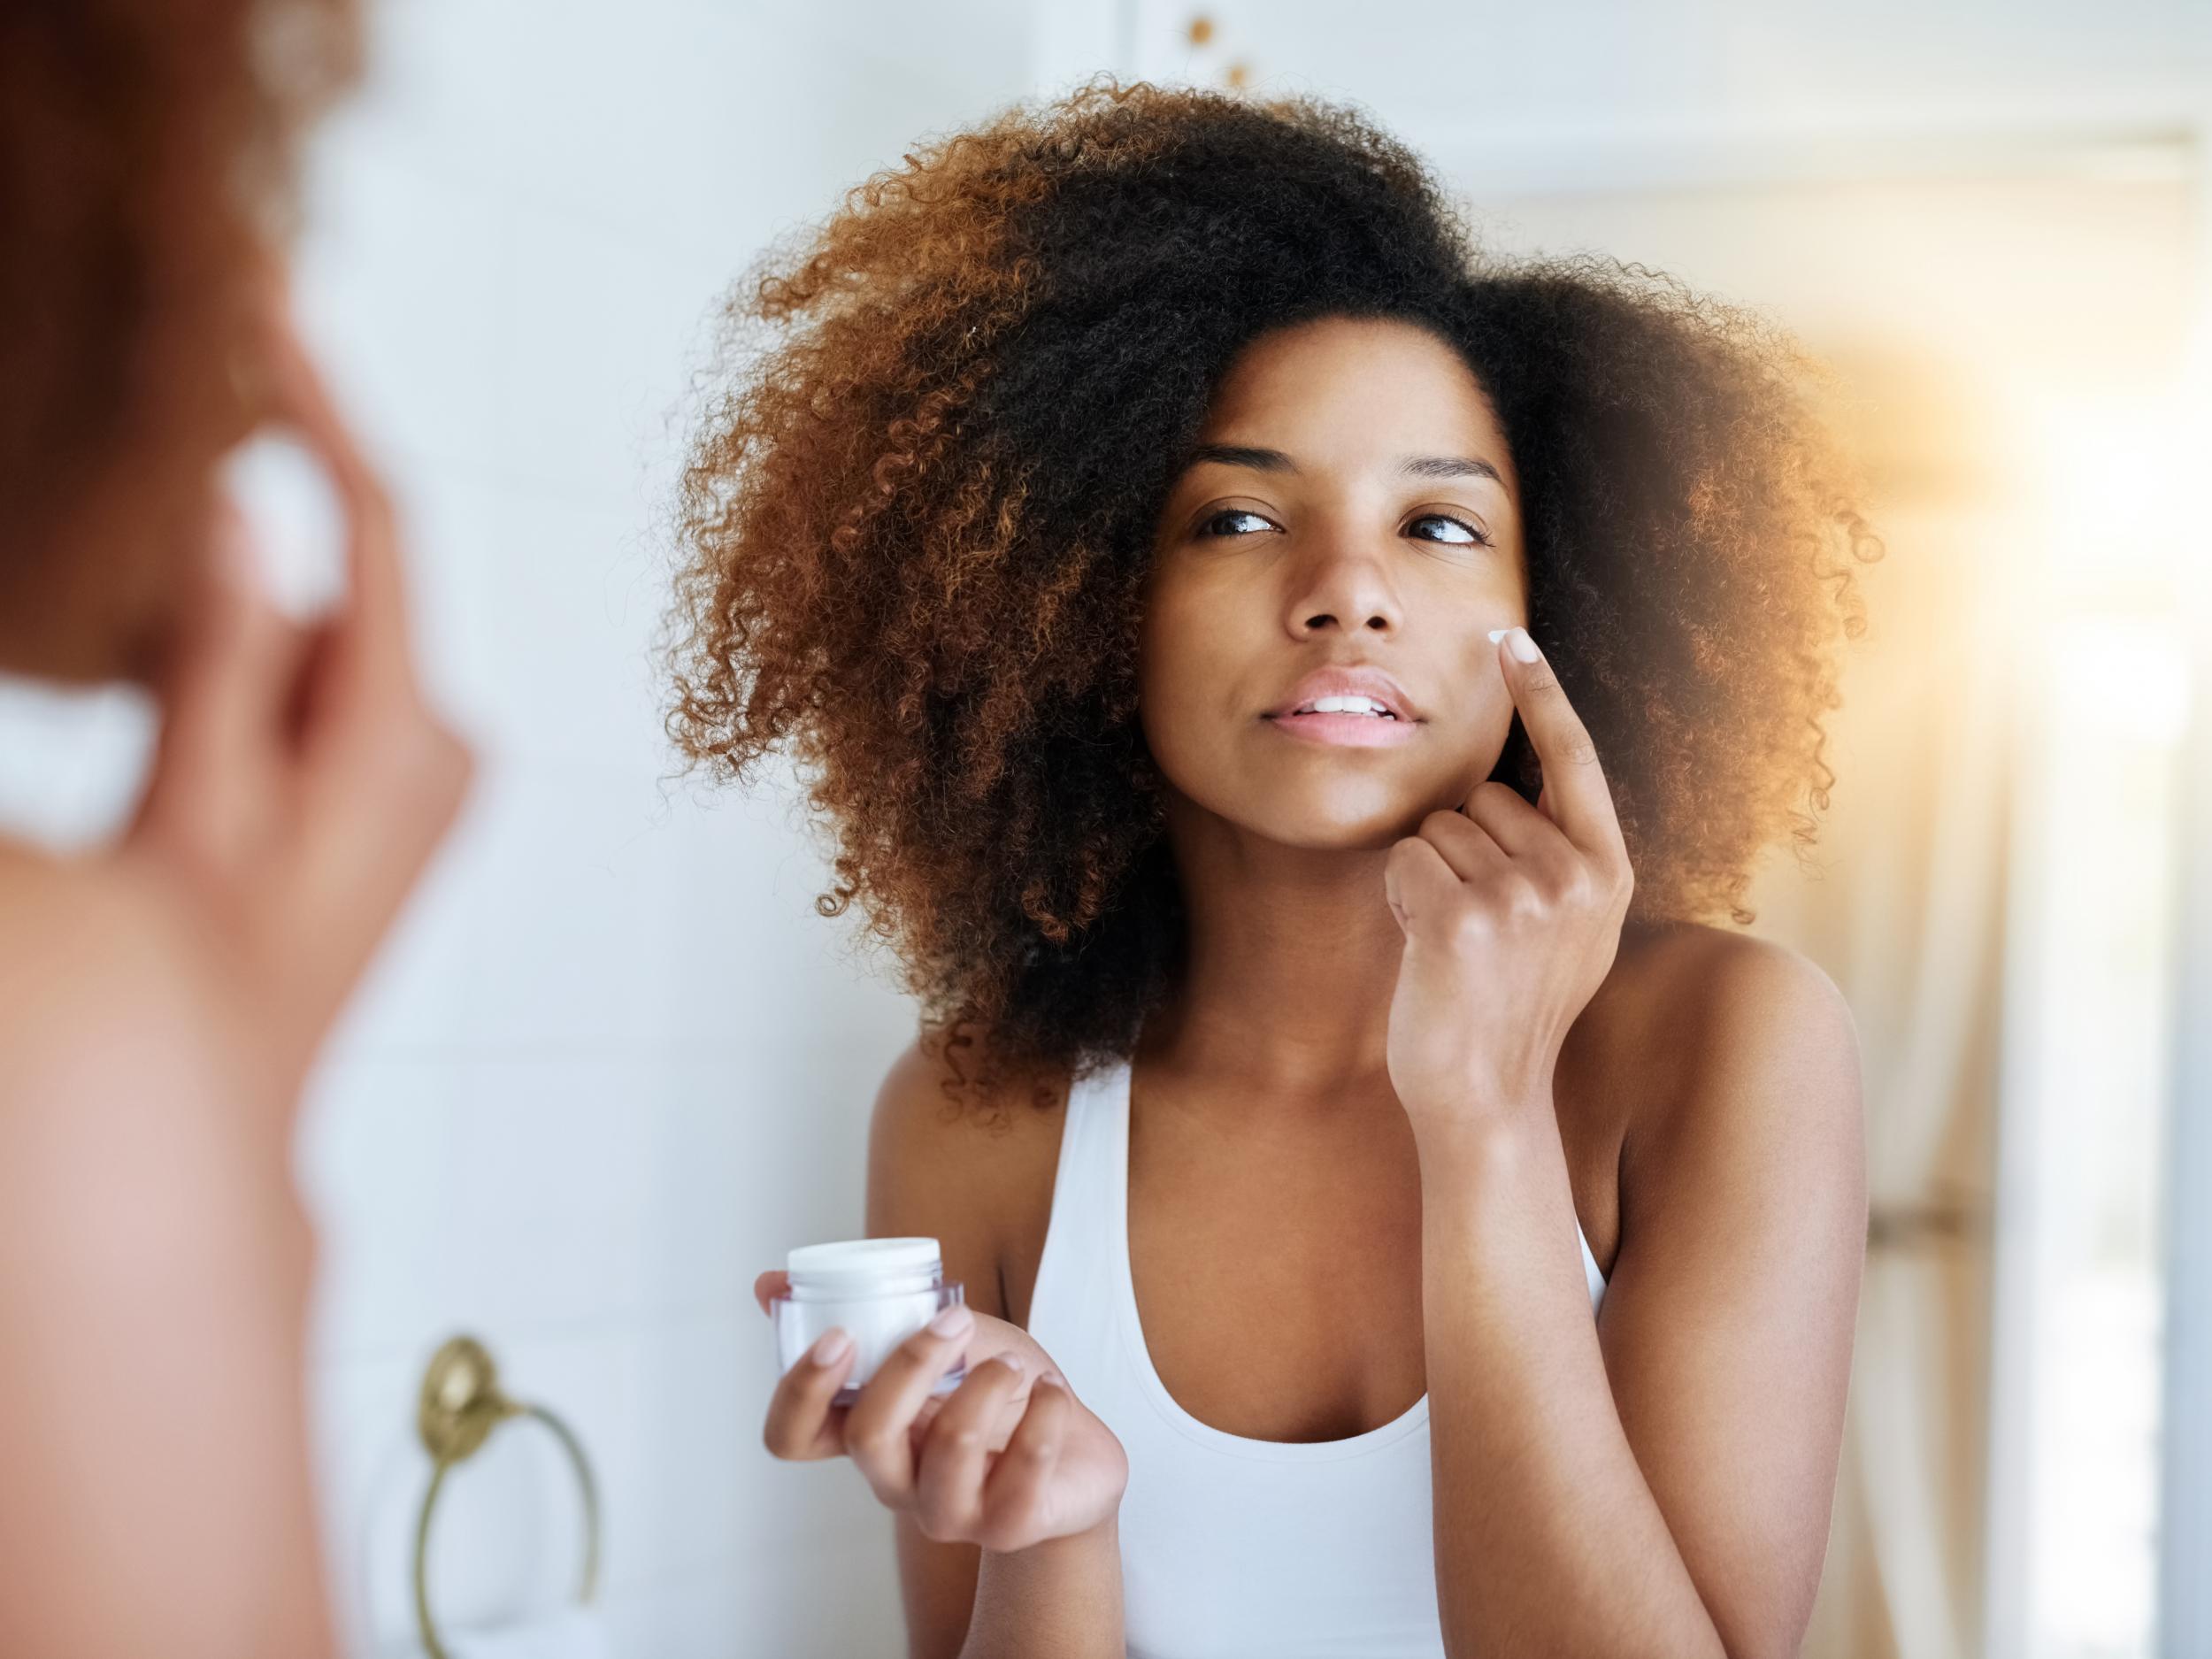 The average person spends three minutes a day using moisturising products, according to poll